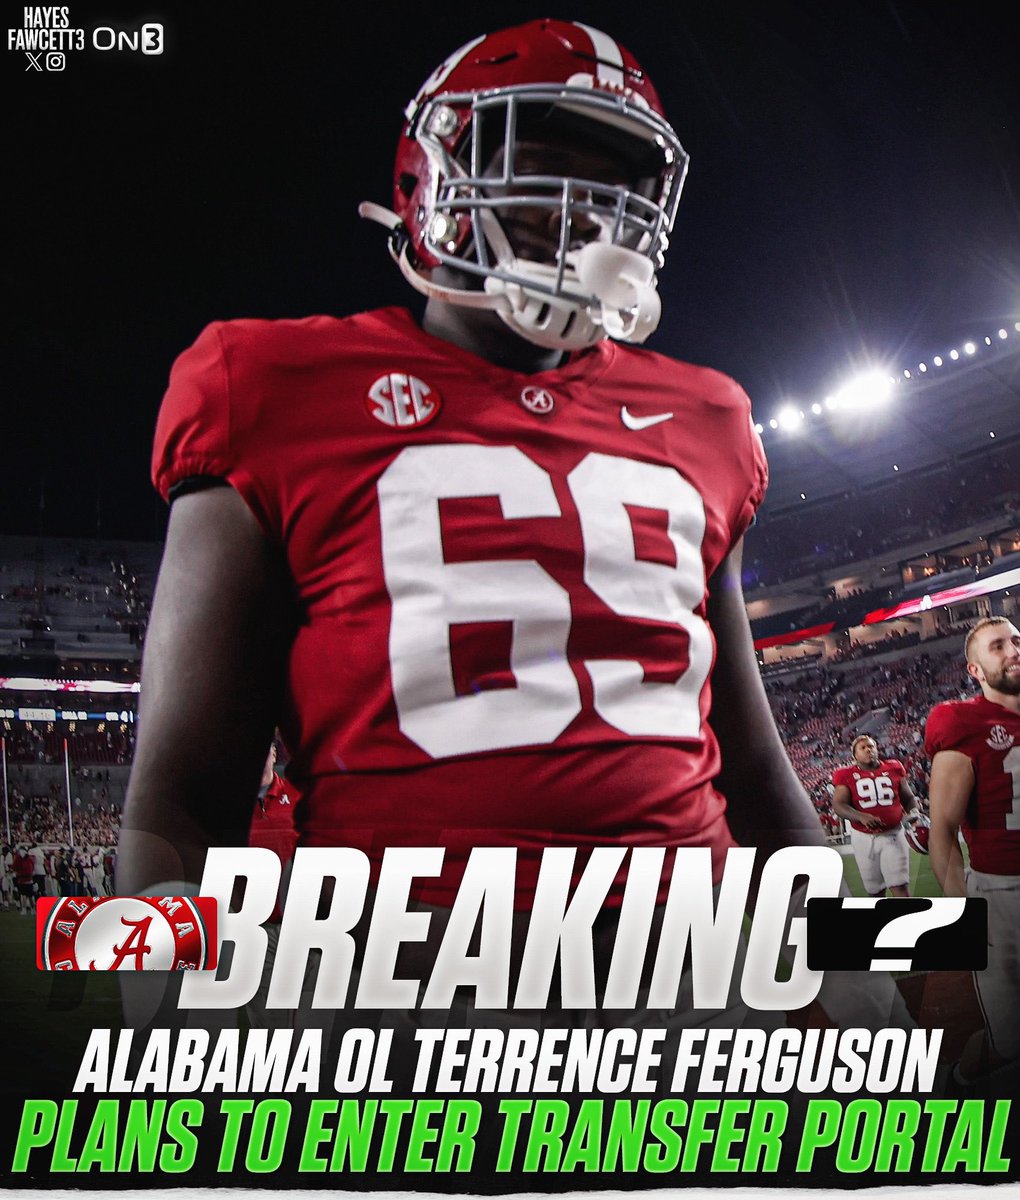 BREAKING: Alabama OL Terrence Ferguson plans to enter the Transfer Portal, he tells @on3sports The 6’4 320 OL will have 2 years of eligibility remaining Was ranked as a Top 35 Recruit (No. 2 IOL) in the ‘21 Class per On3 on3.com/news/alabama-o…